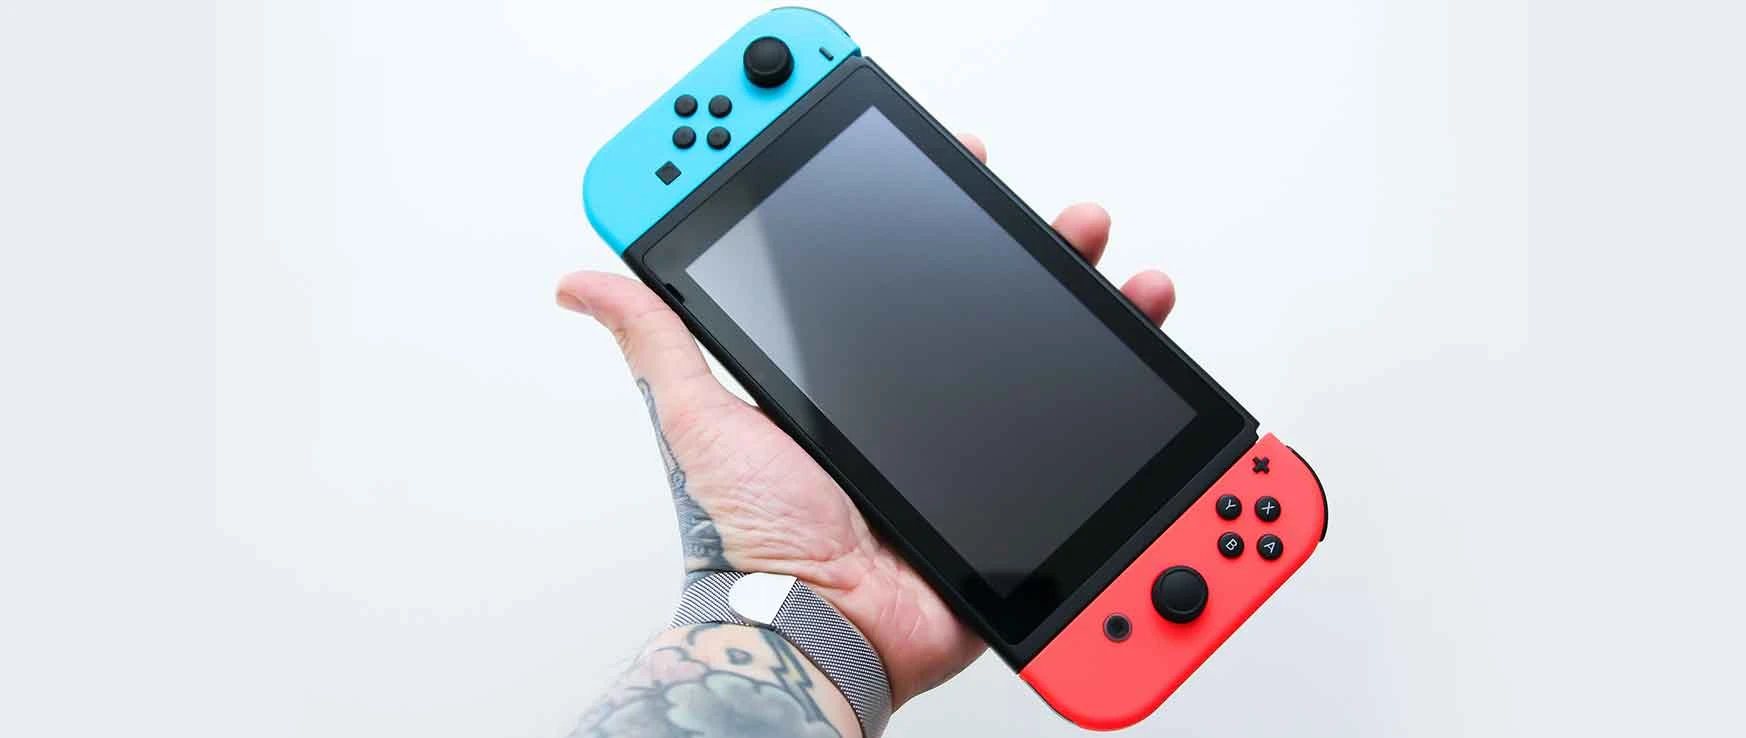 Chris Official on X: Just had to get this Nintendo switch